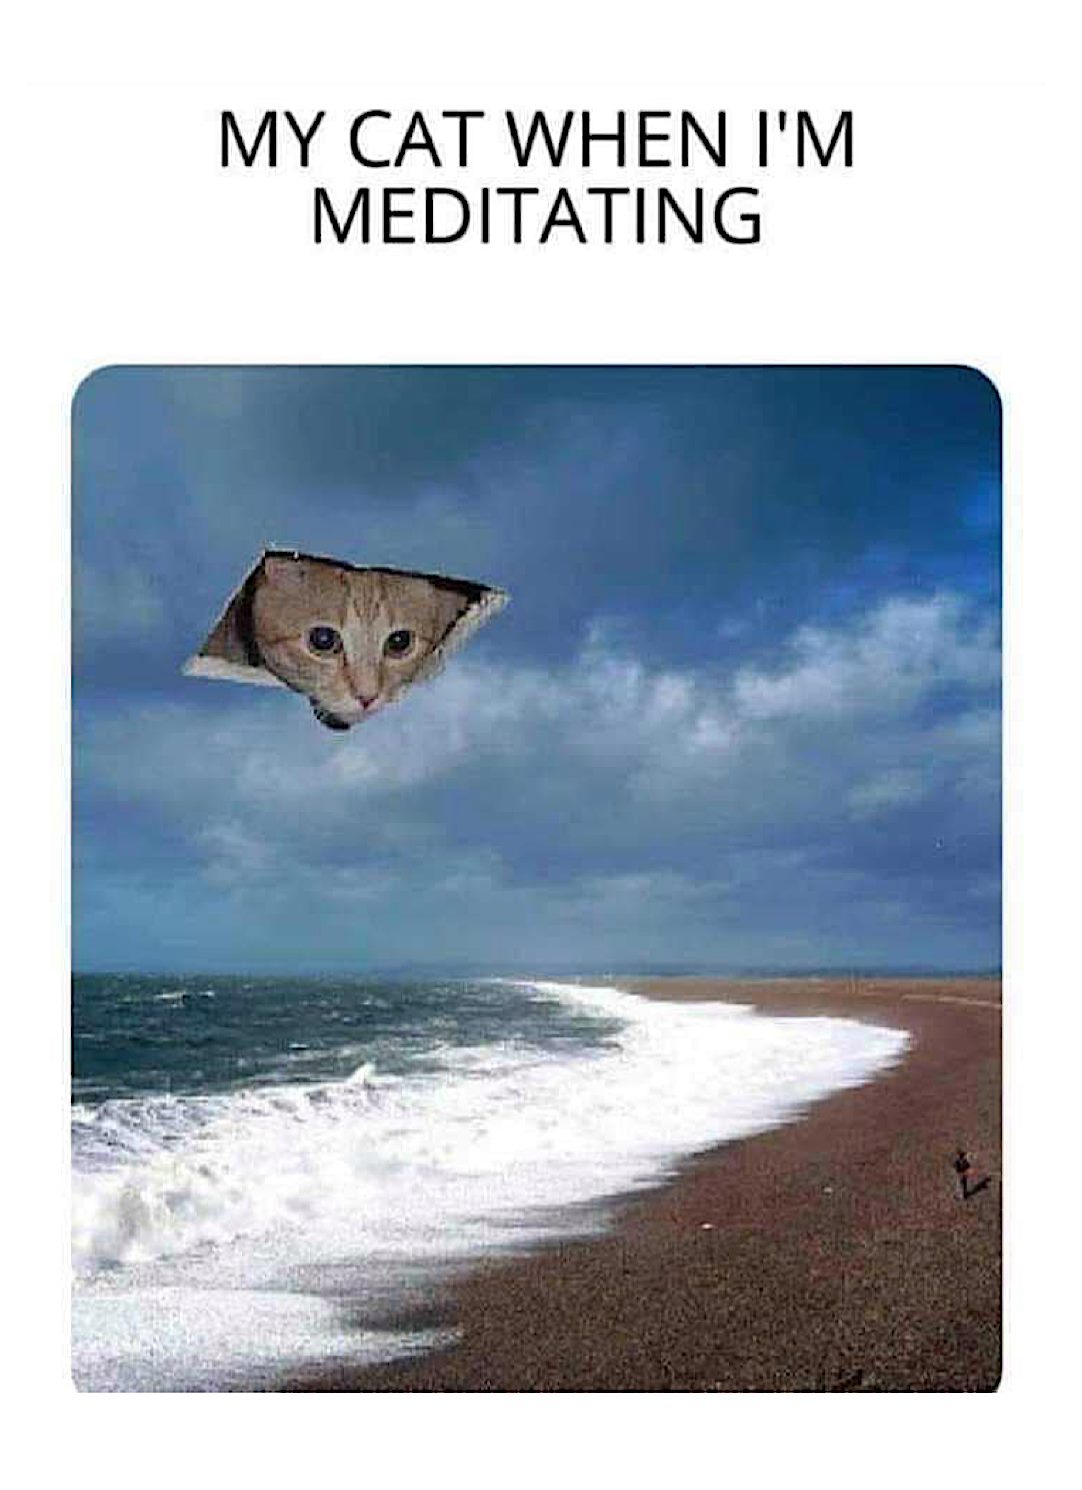 May be an image of cat and text that says 'MY CAT WHEN I'M MEDITATING'